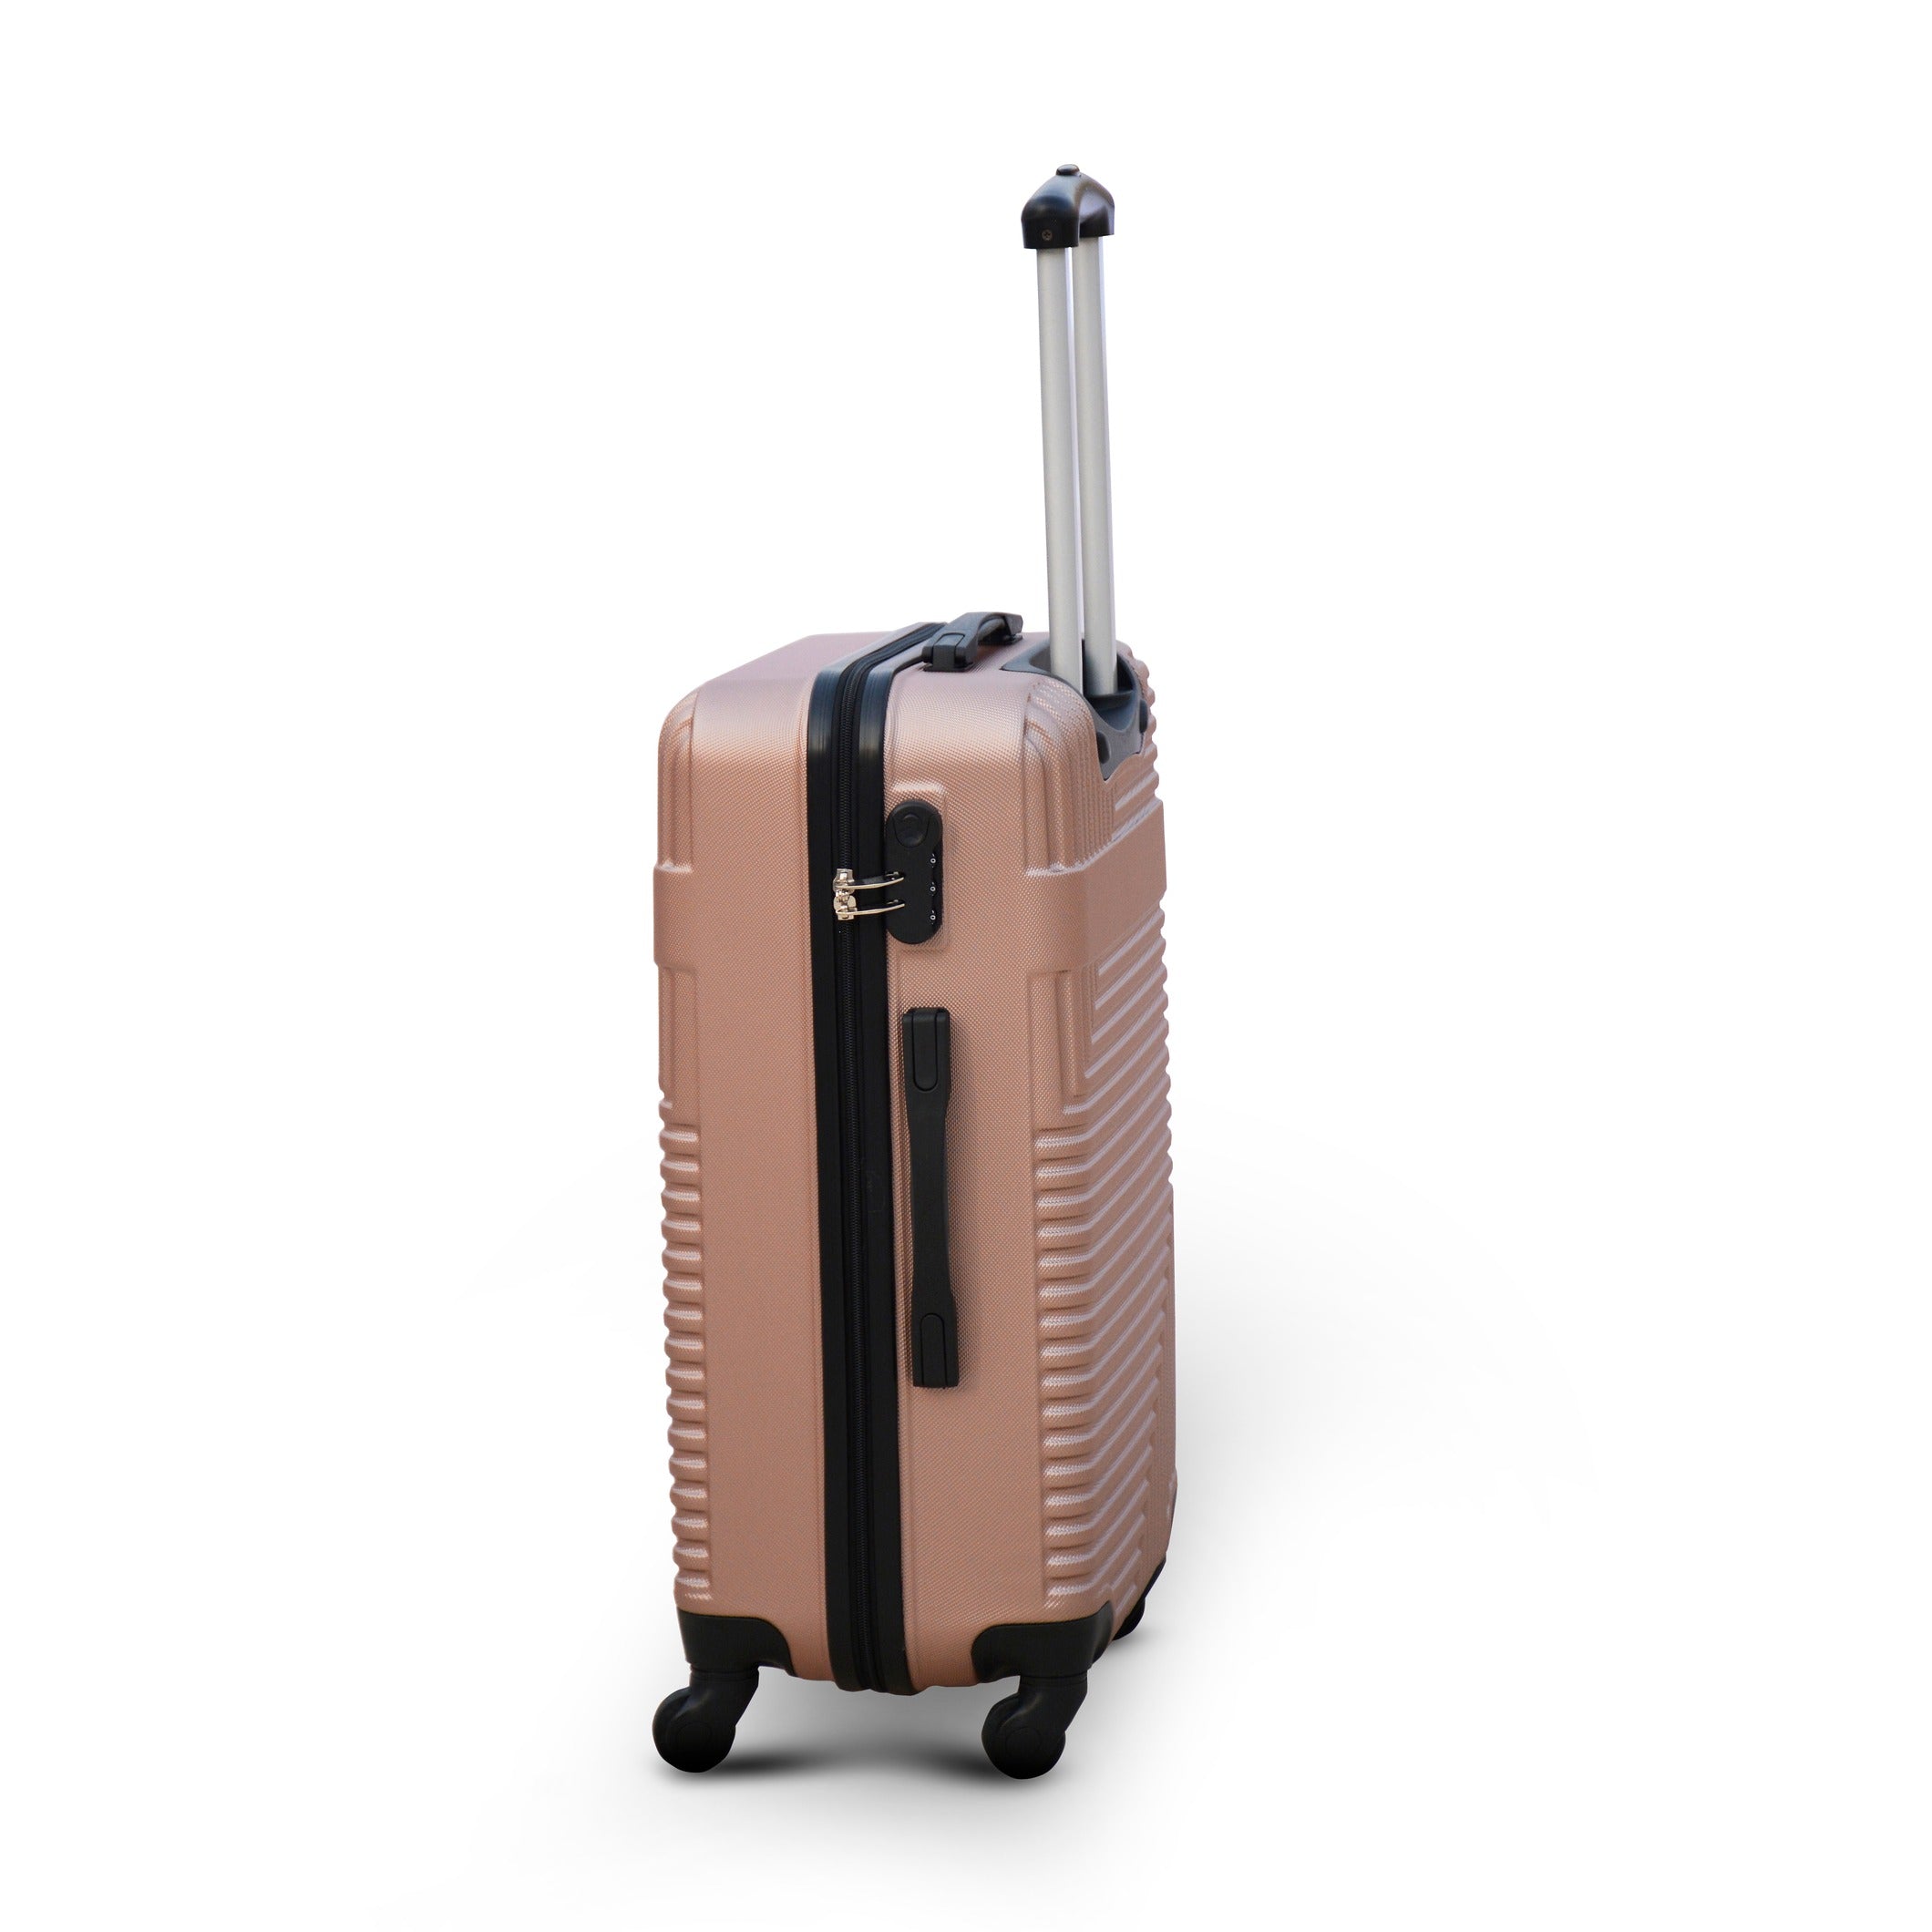 20" Rose Gold Colour Travel Way ABS Luggage Lightweight Hard Case Trolley Bag | 2 Year Warranty